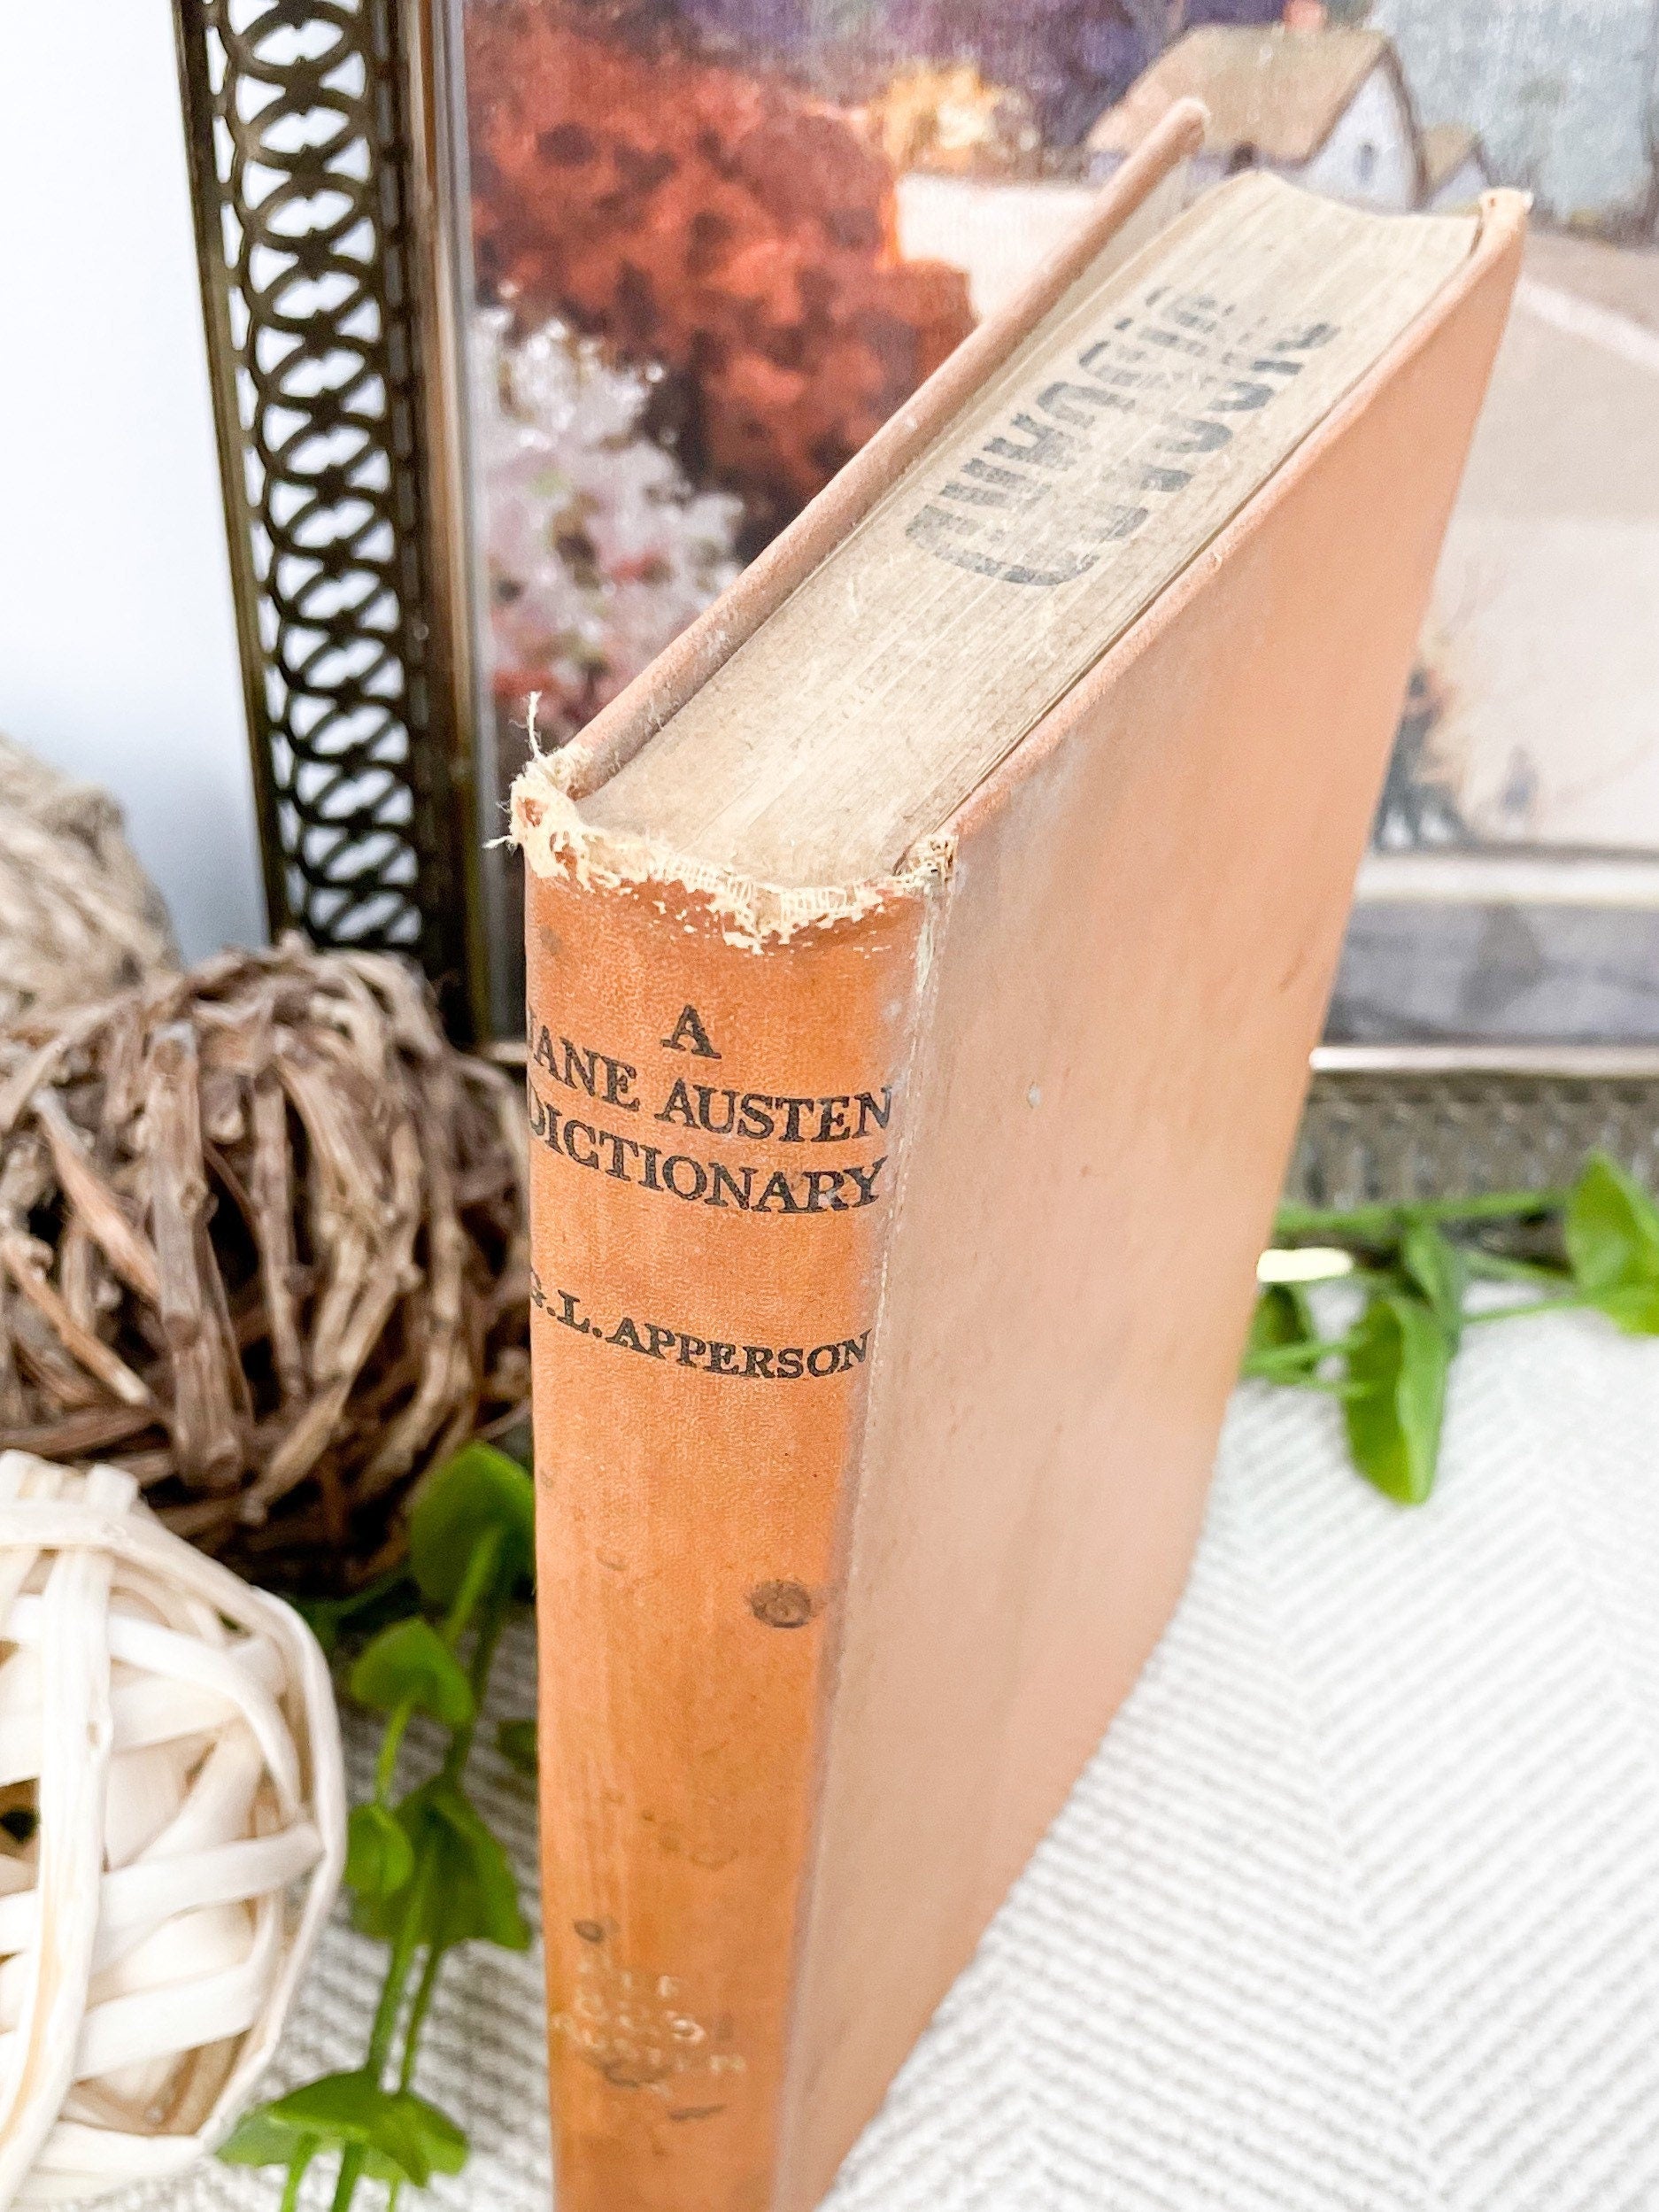 First Edition Antique Book, A Jane Austen Dictionary by G.L. Apperson